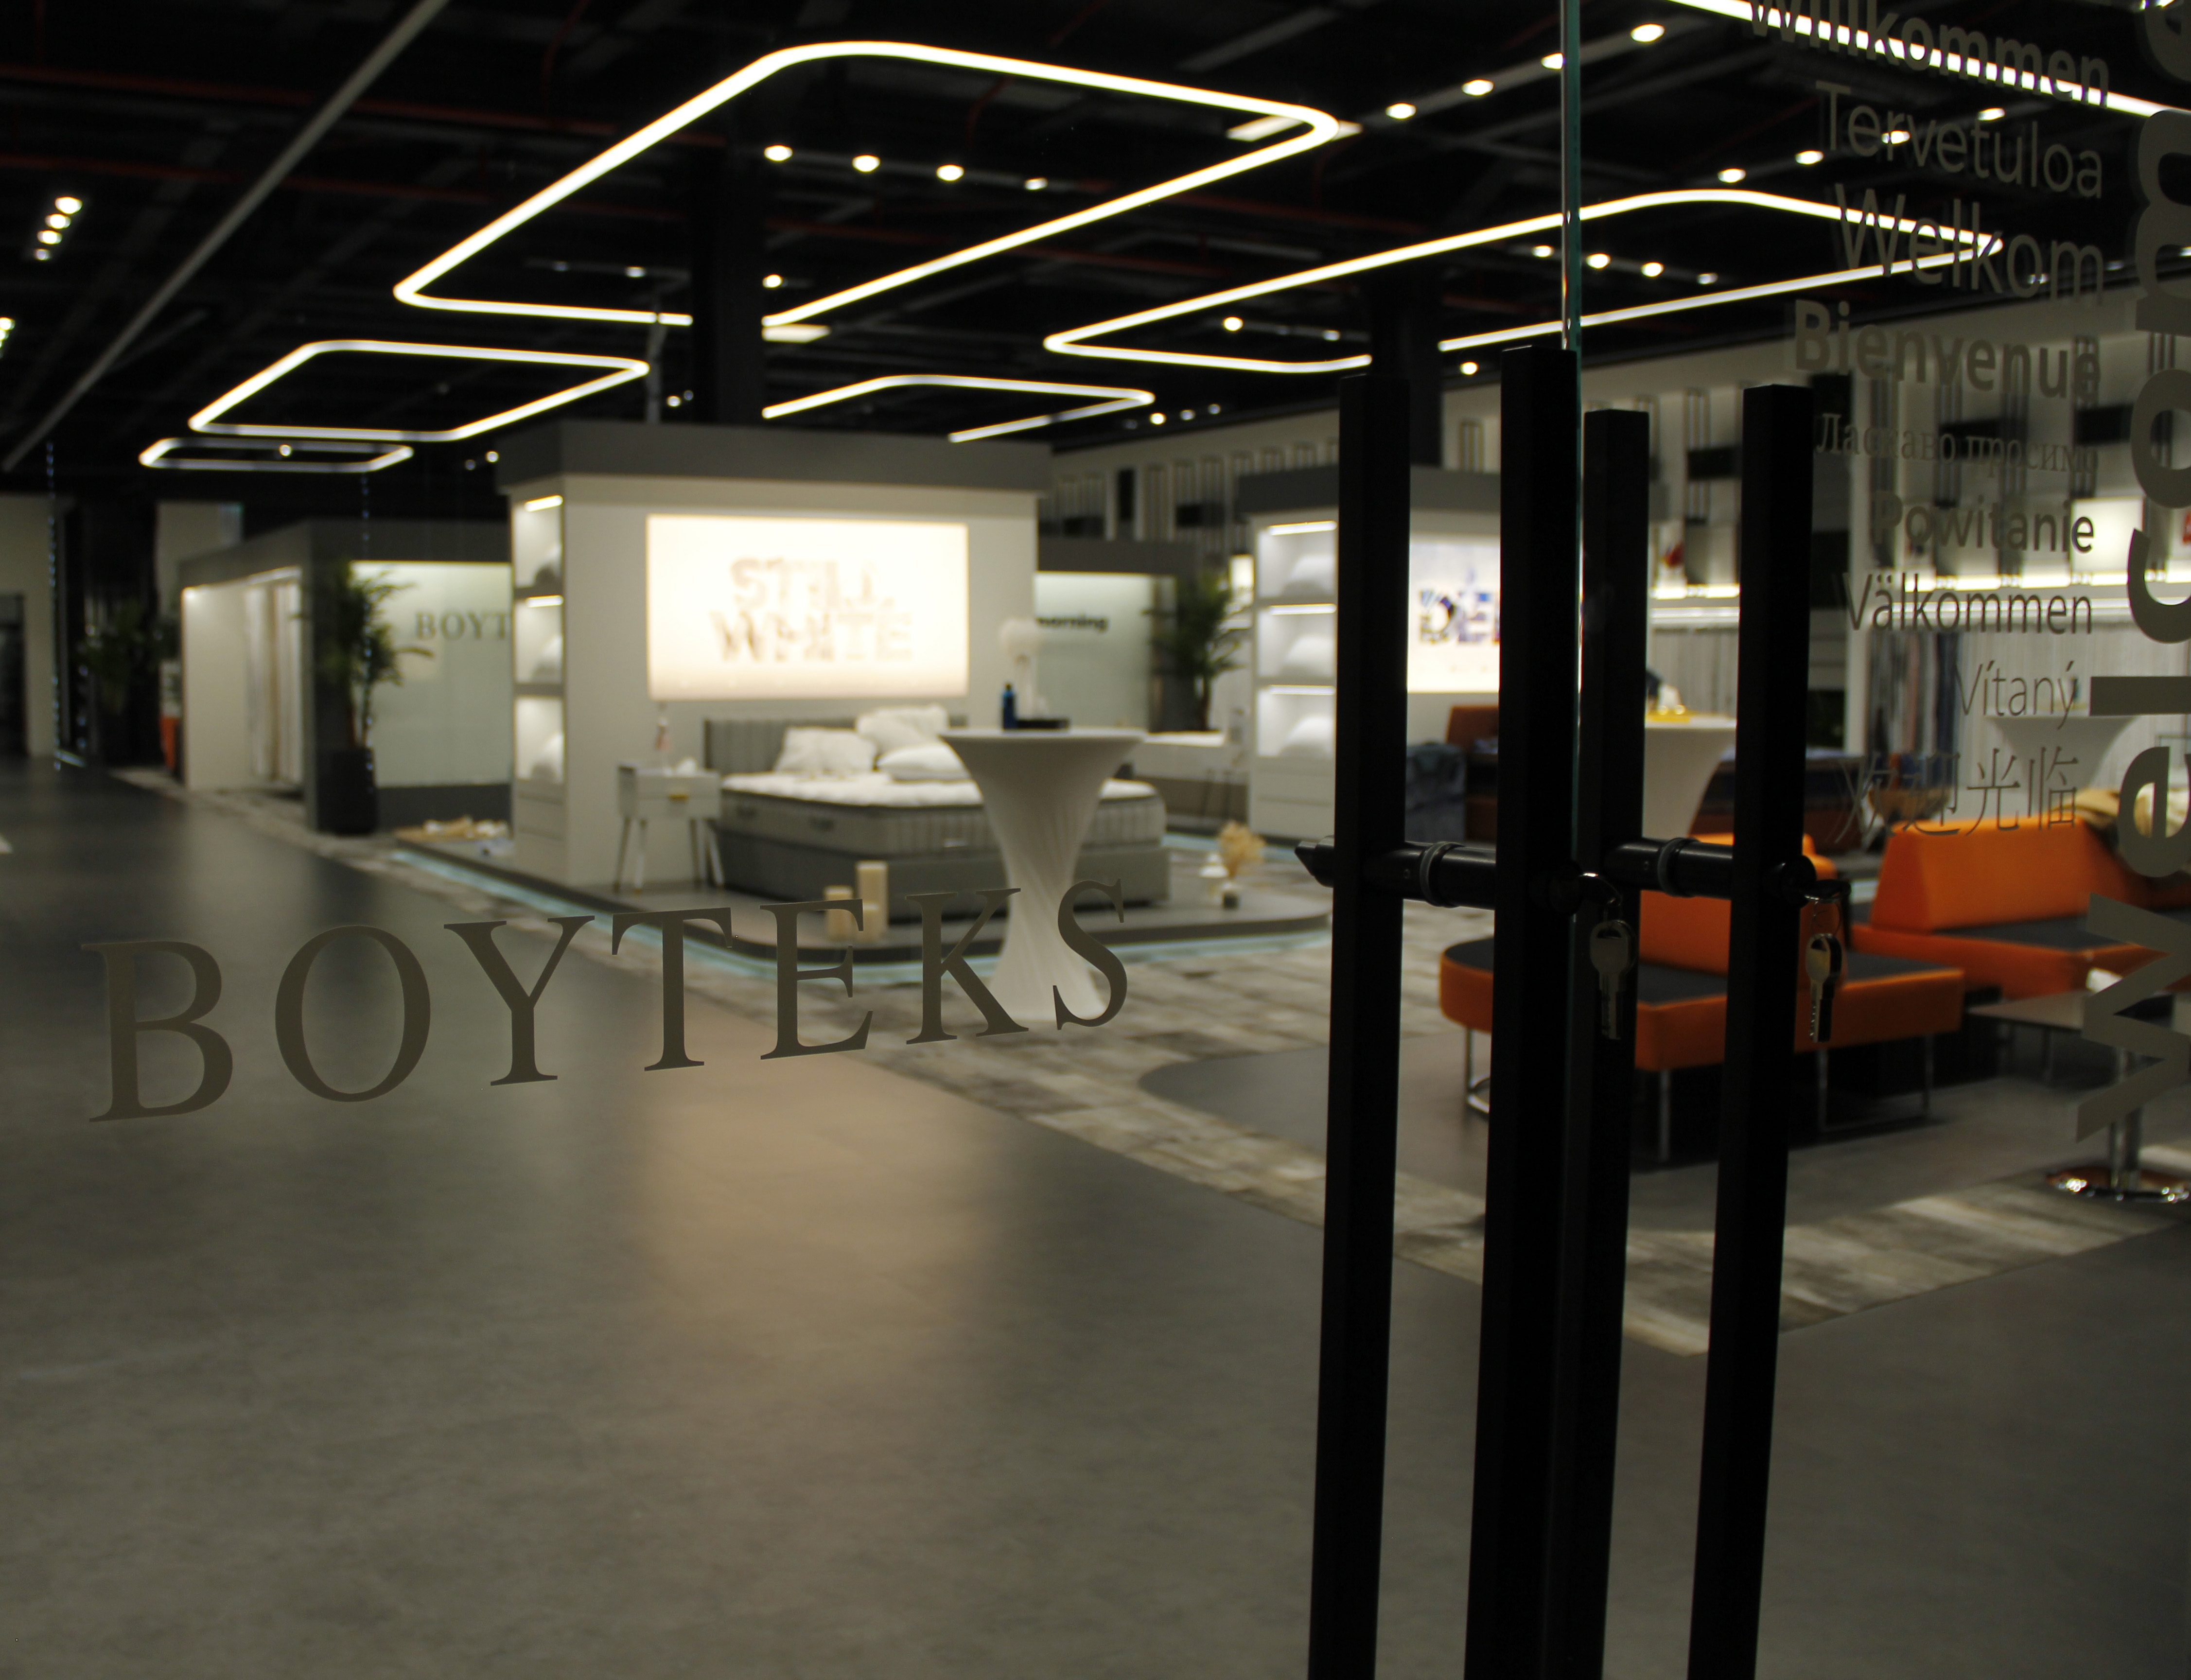 We have established a brand new showroom concept where our customers will have a premium experience.